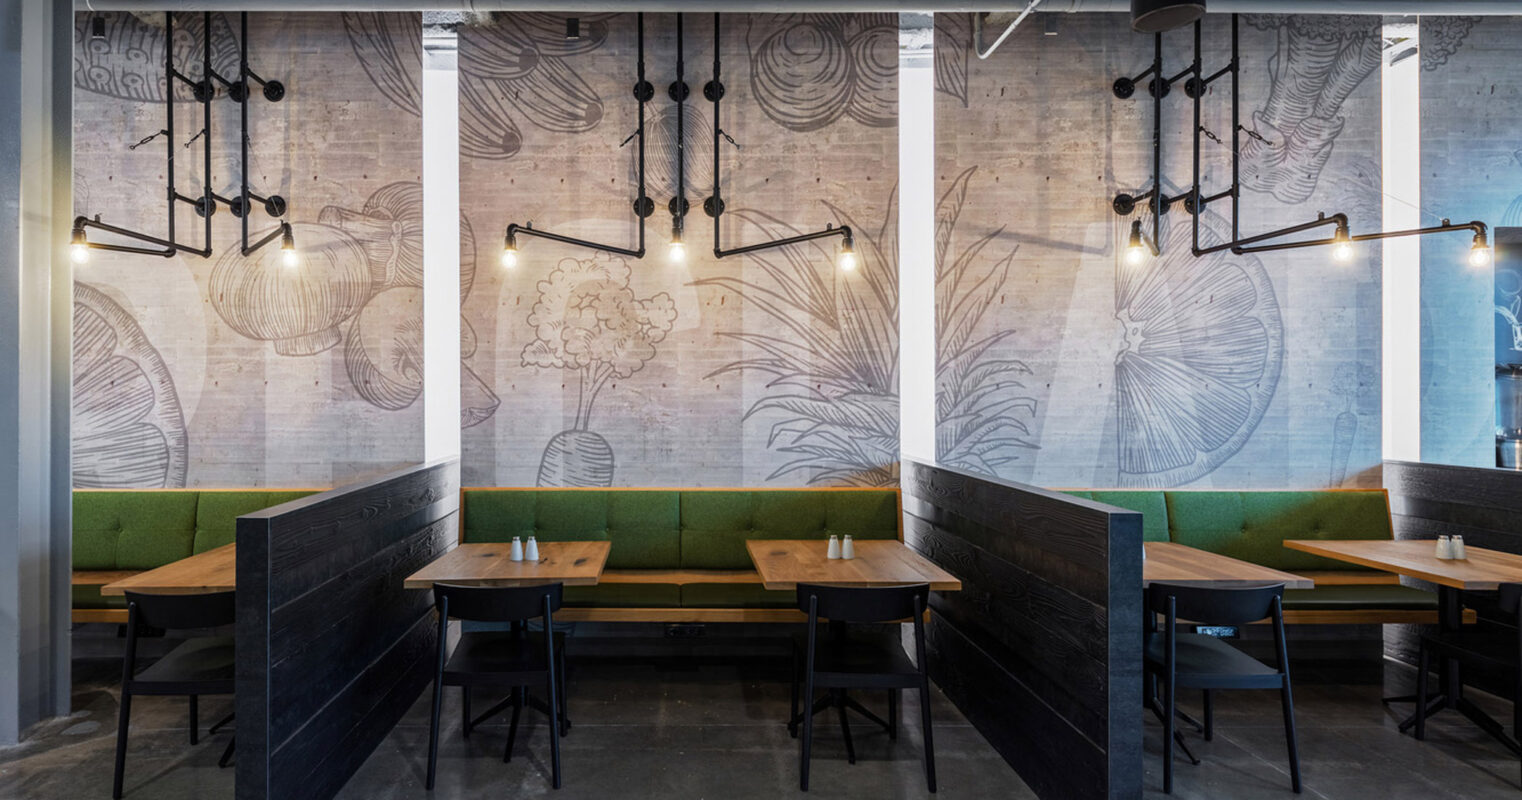 Modern industrial-style dining space featuring exposed ceiling pipes, concrete walls adorned with botanical illustrations, and an eclectic mix of hanging pendant lights. Dark wooden tables complement green upholstered booth seating, creating a harmonious, chic urban eatery ambiance.